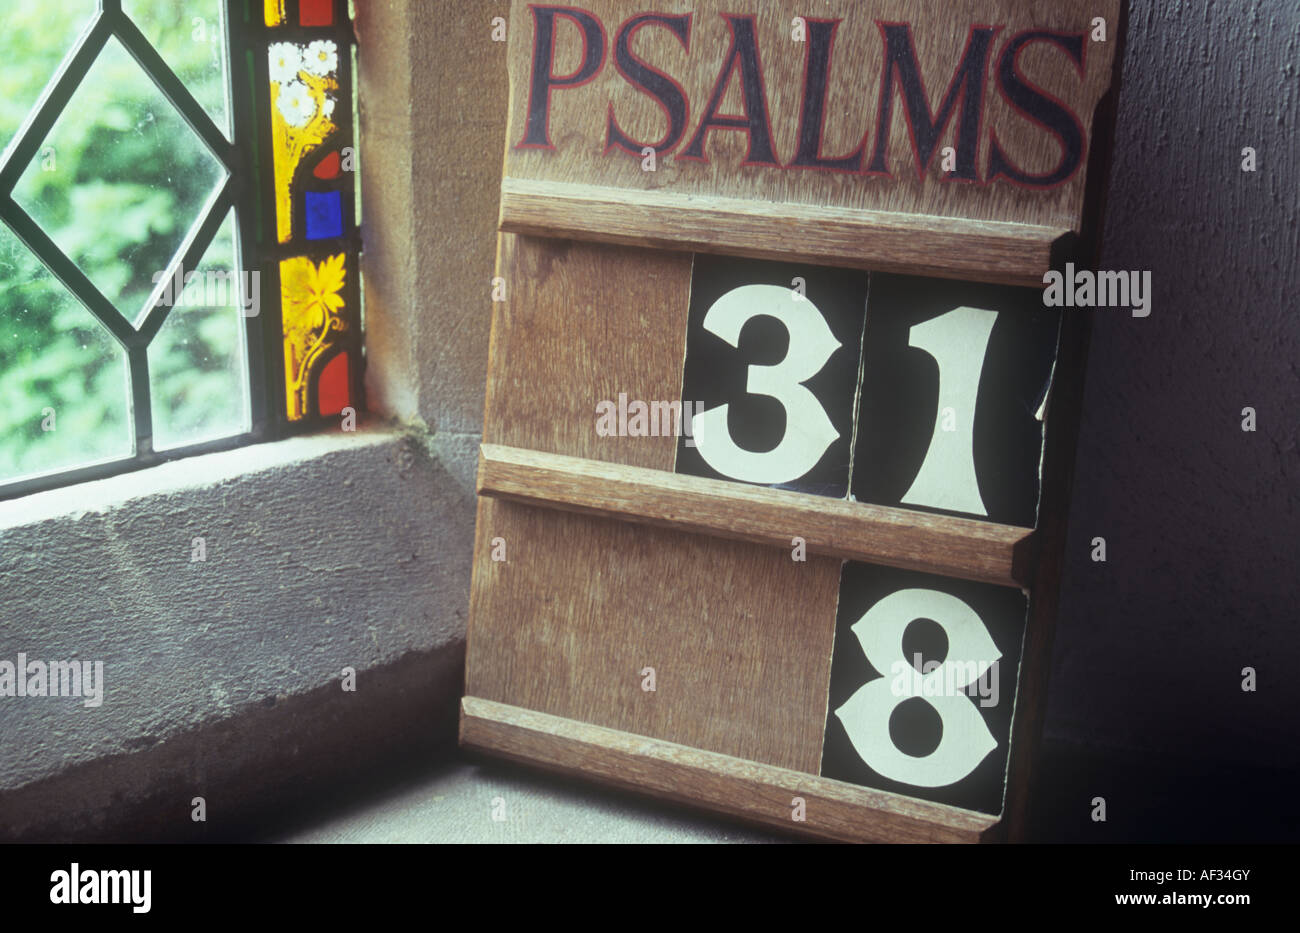 Board indicating selected Psalm numbers on sill next to diamond leaded window with stained glass border and greenery outside Stock Photo